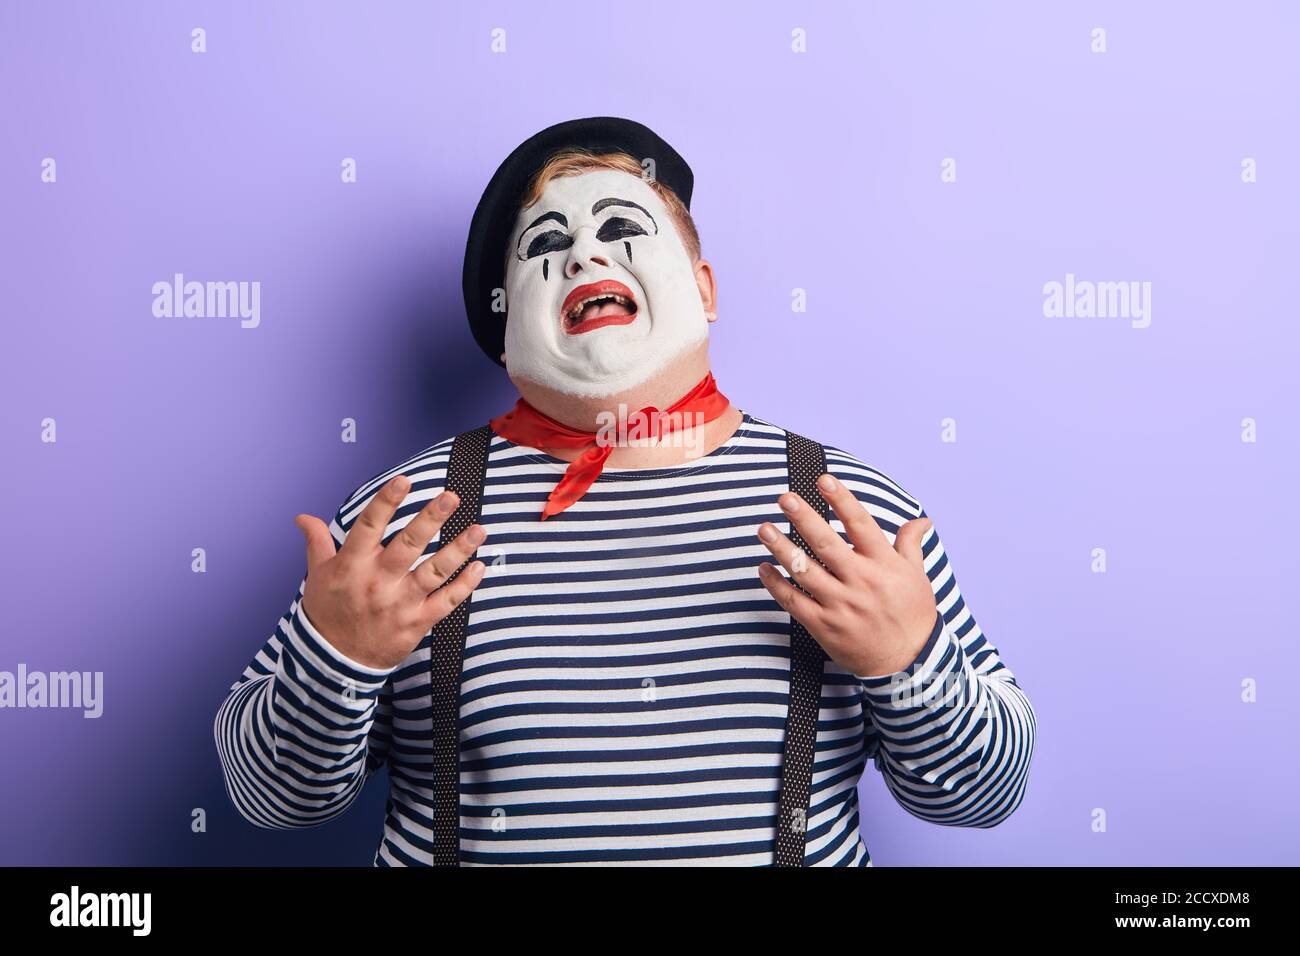 close up of a sad , upset , depressed crying clown with raised arms looking up, isolated blue background, studio shot Stock Photo